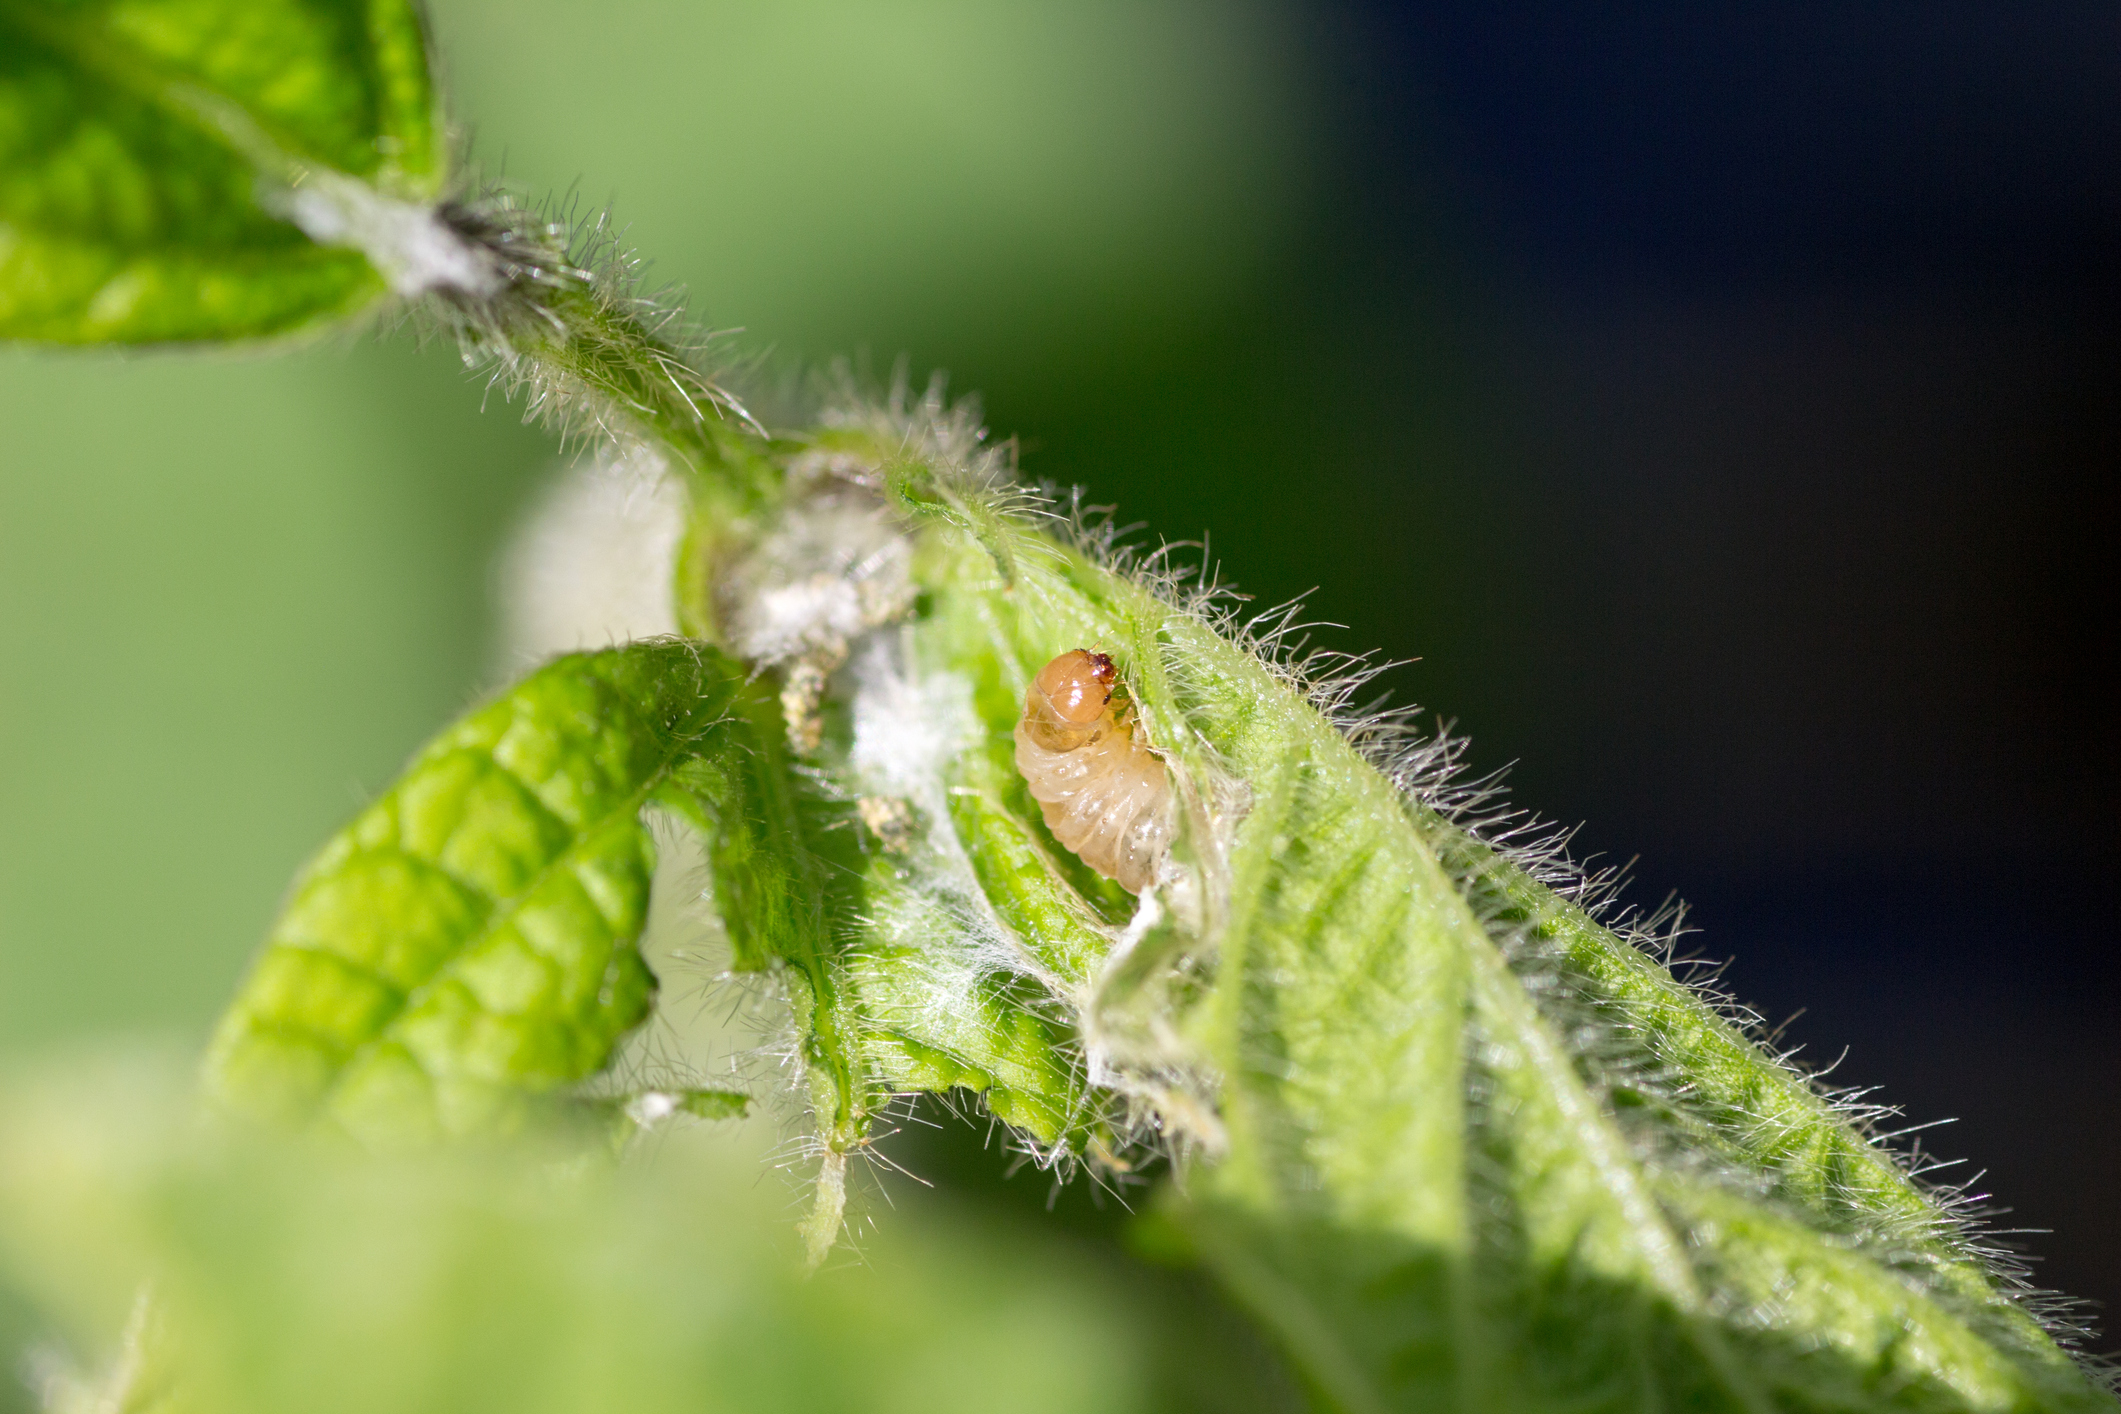 Crop-damaging soybean gall midge emerged earlier this year. Here are tips to eliminate their threat.